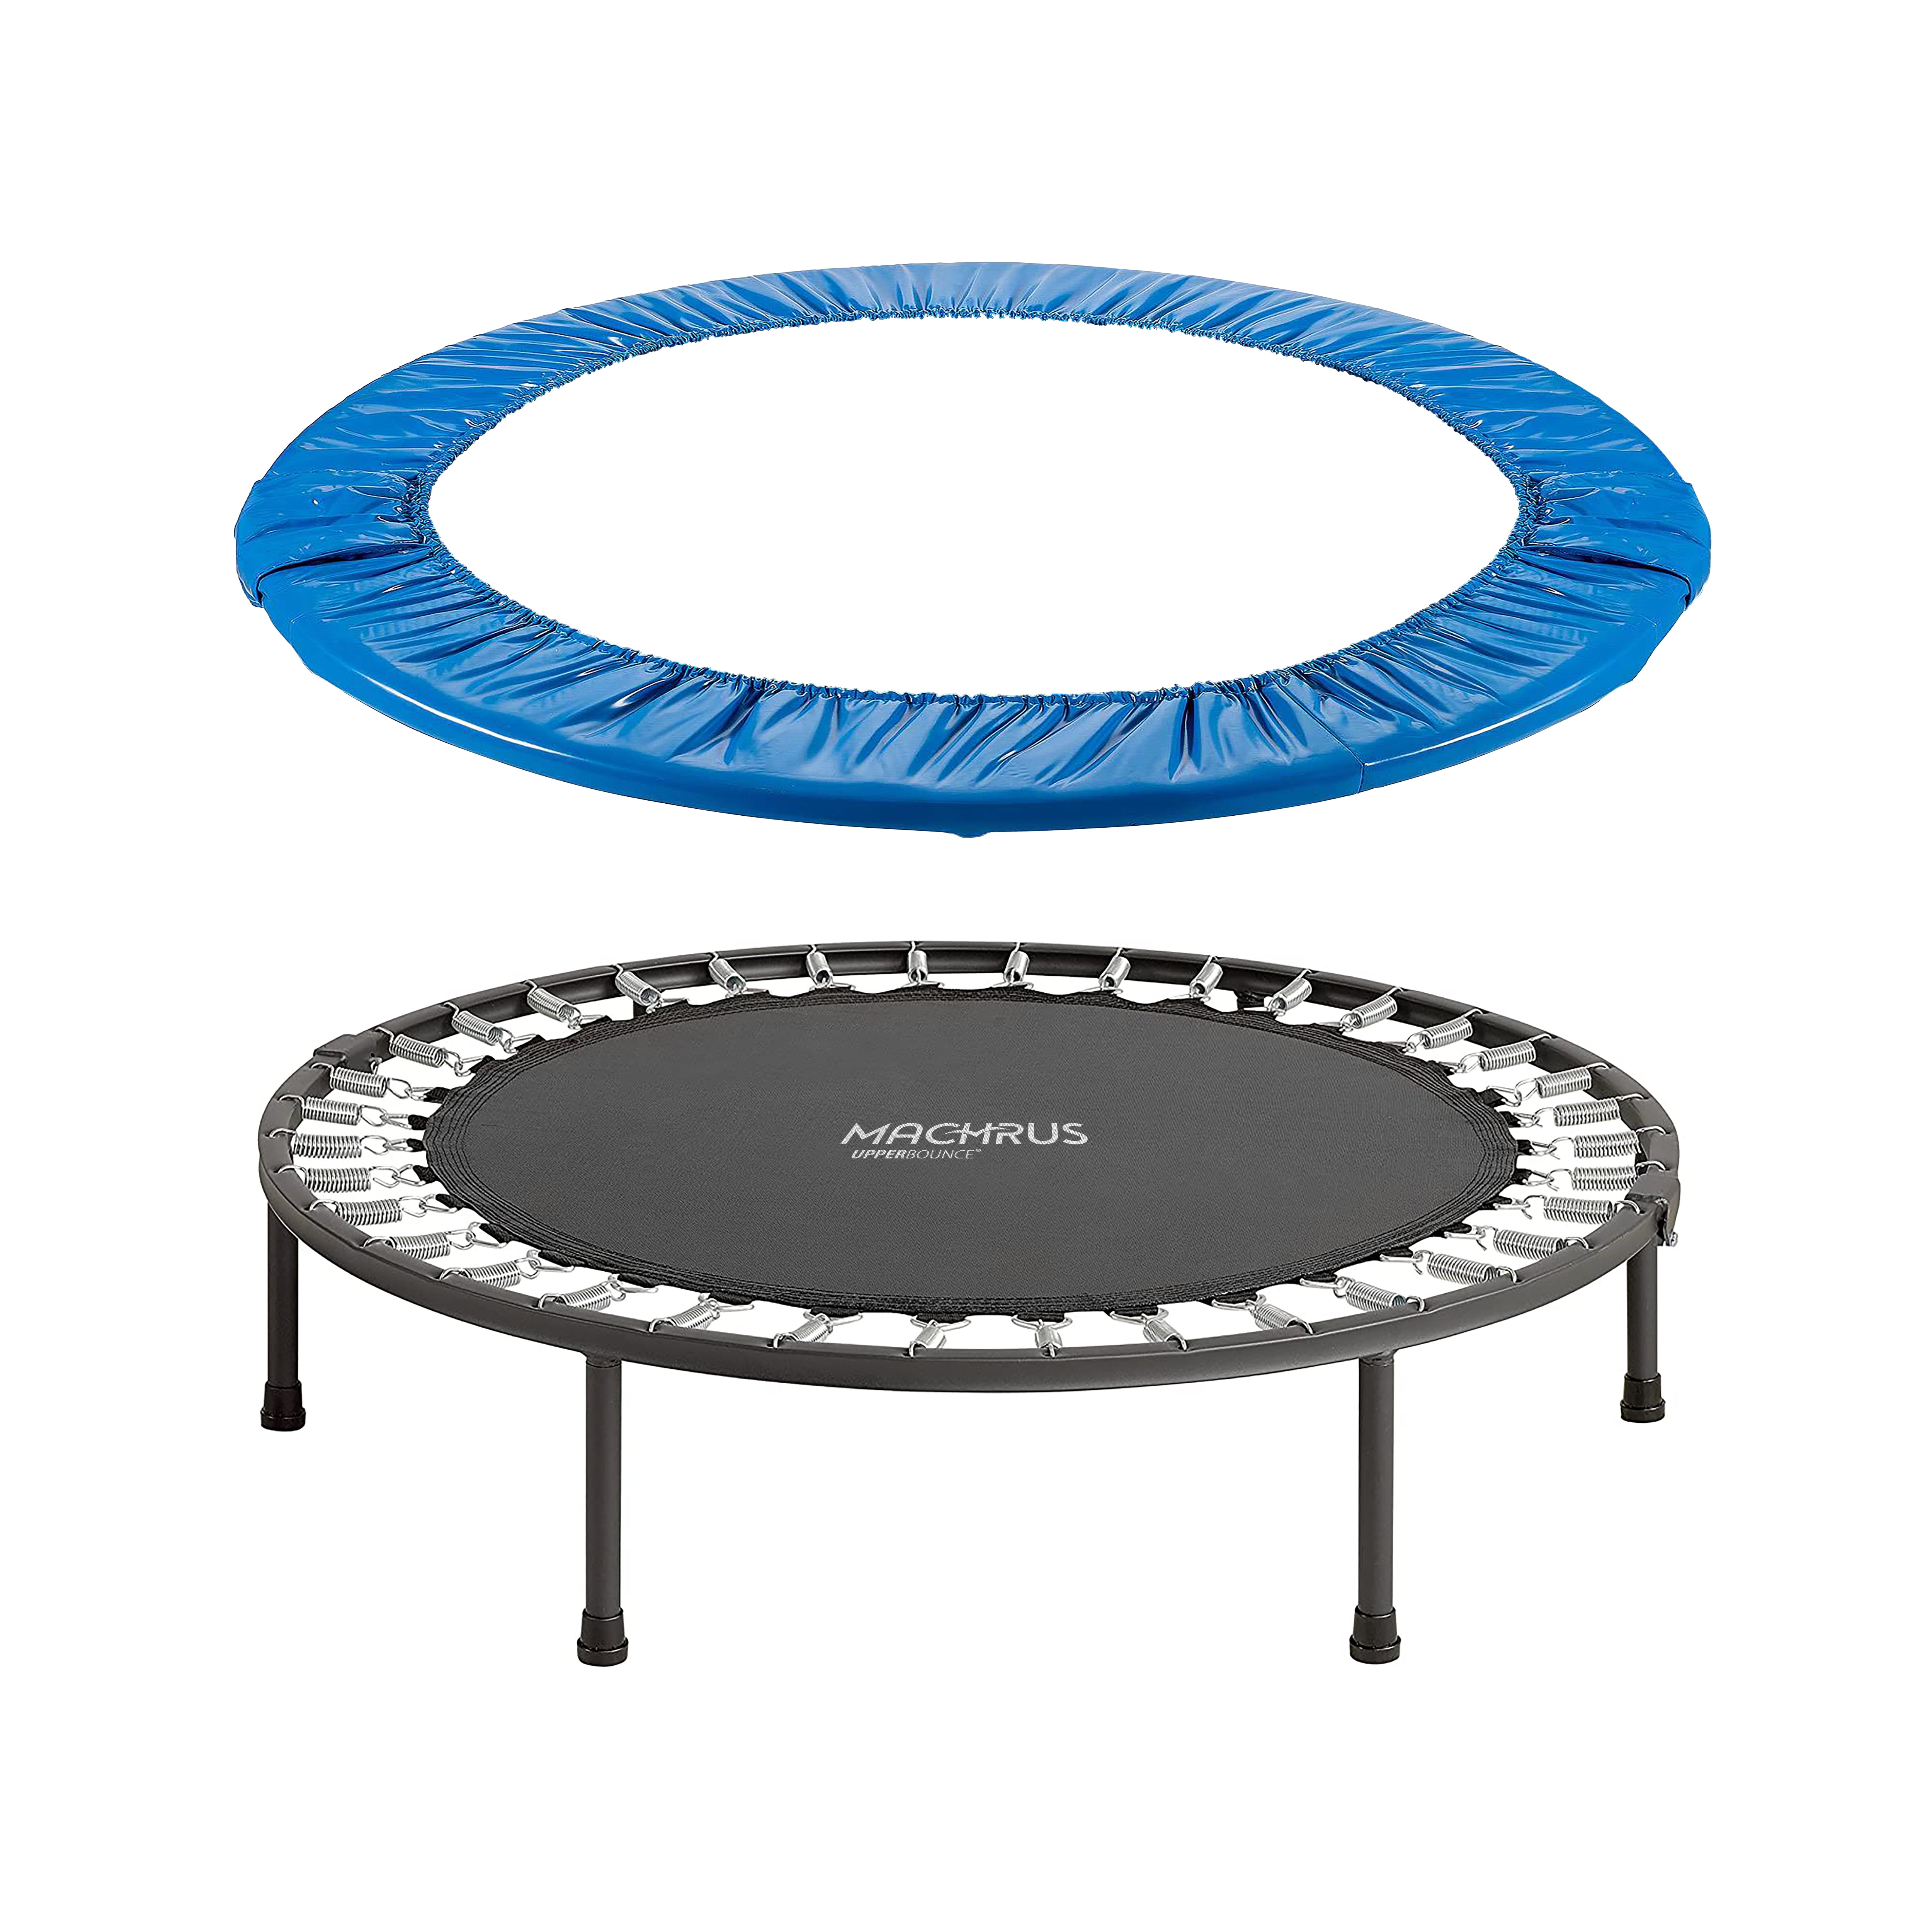 Machrus Upper Bounce38" Mini Round Trampoline Replacement Safety (Spring Cover) for 6 Legs - Red - Walmart.com